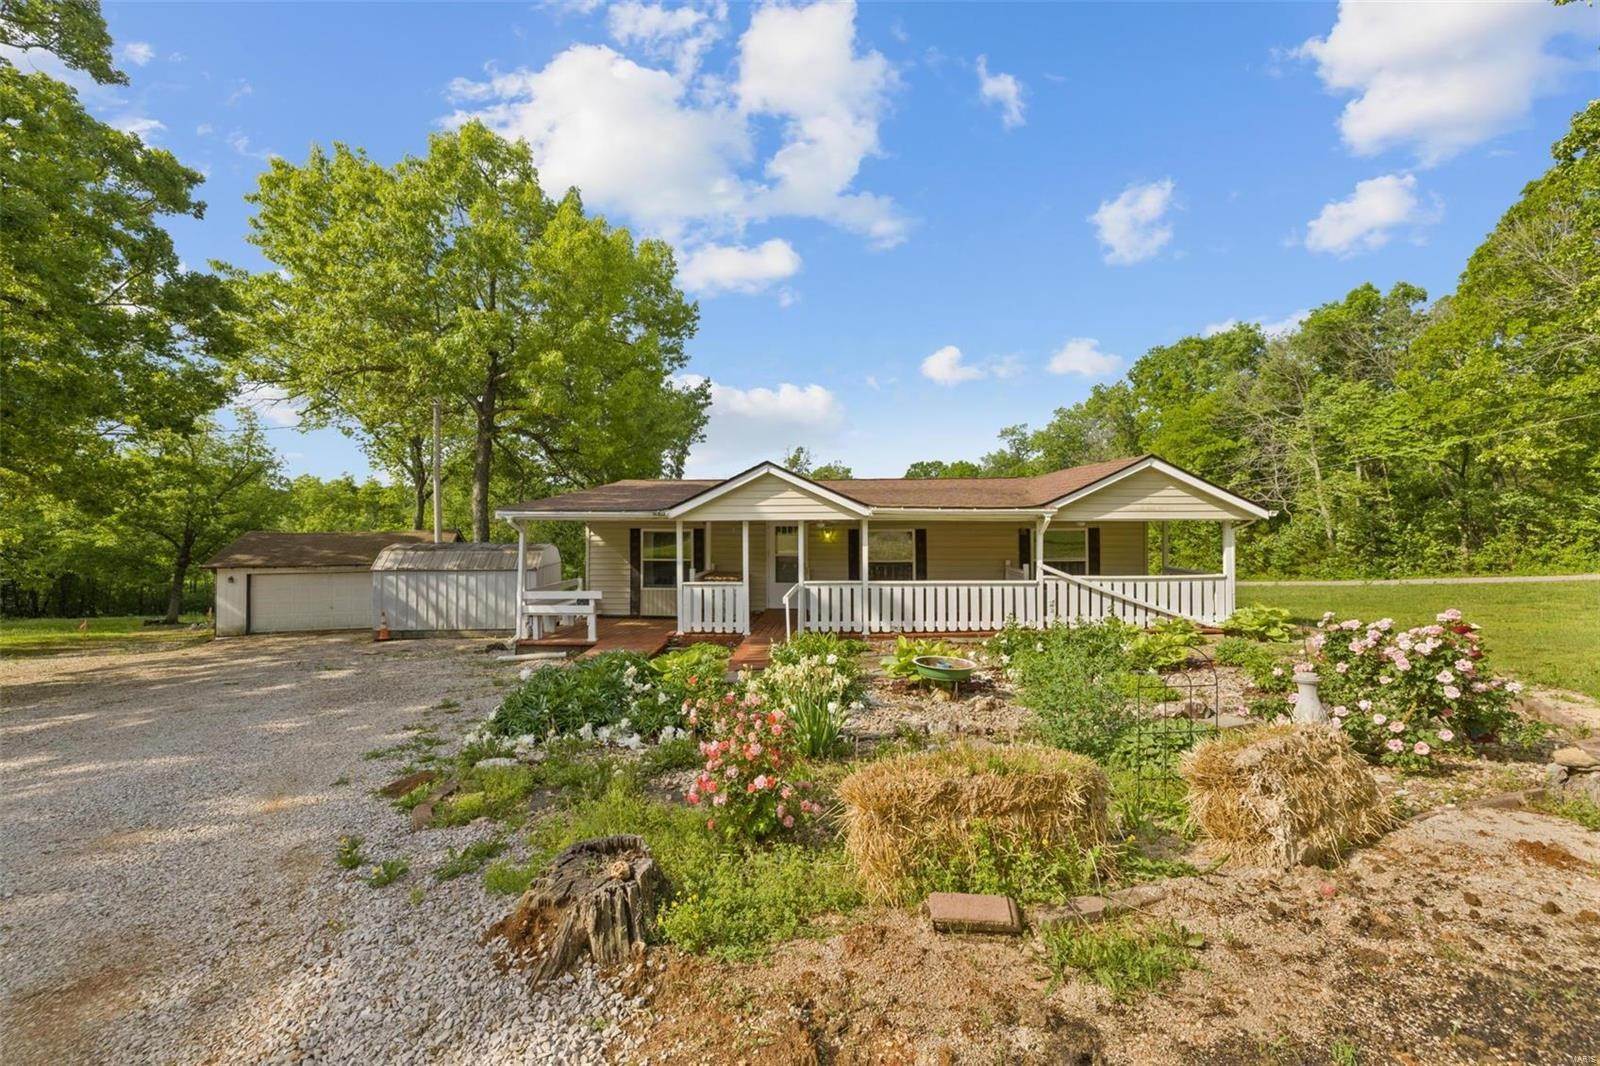 Property for Sale at 10571 Pat Daly Road Cadet, Missouri 63630 United States